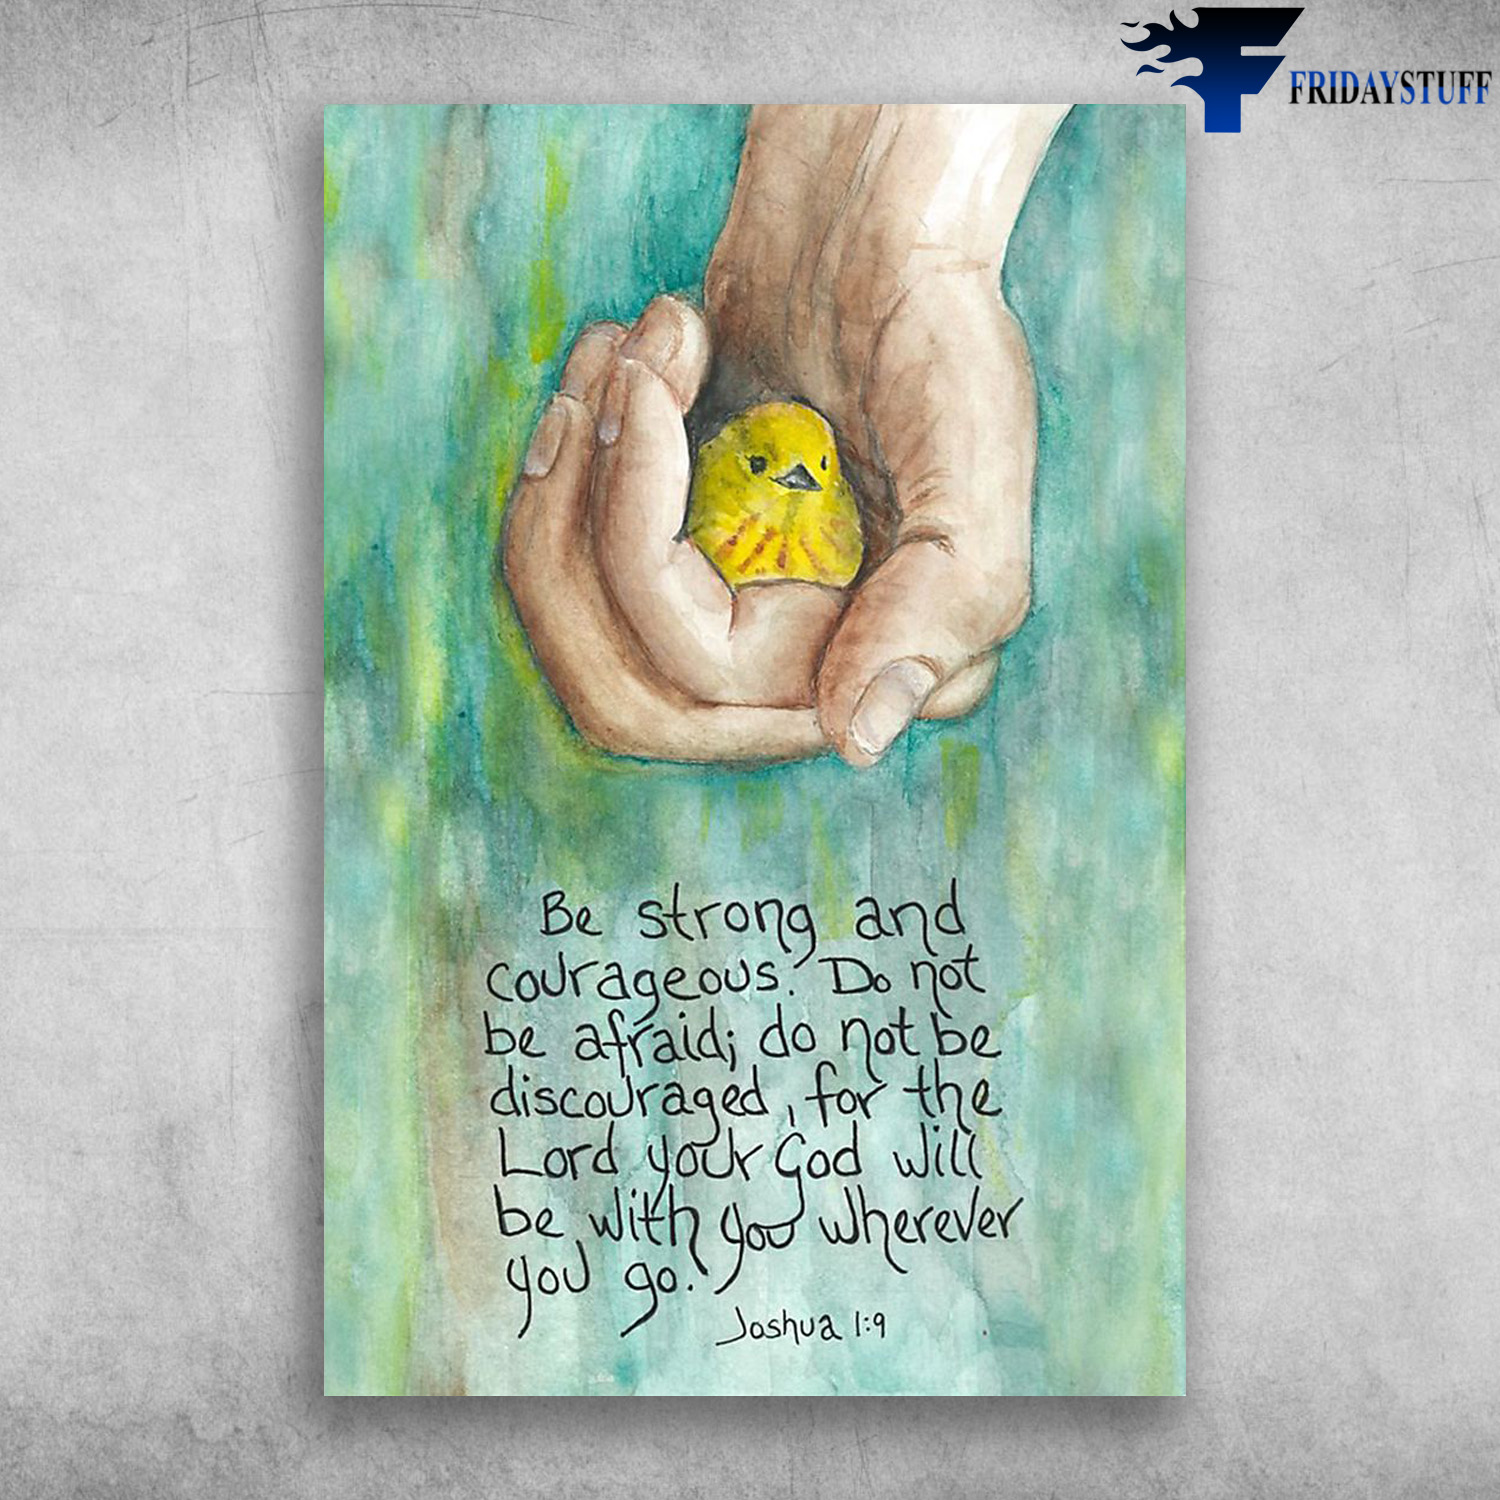 Tiny Bird In The Hand - Be Strong And Courage, Do Not Be Afraid, Do Not Be Discouraged, For The Lord Youe God Will Be With You, Wherever You Go